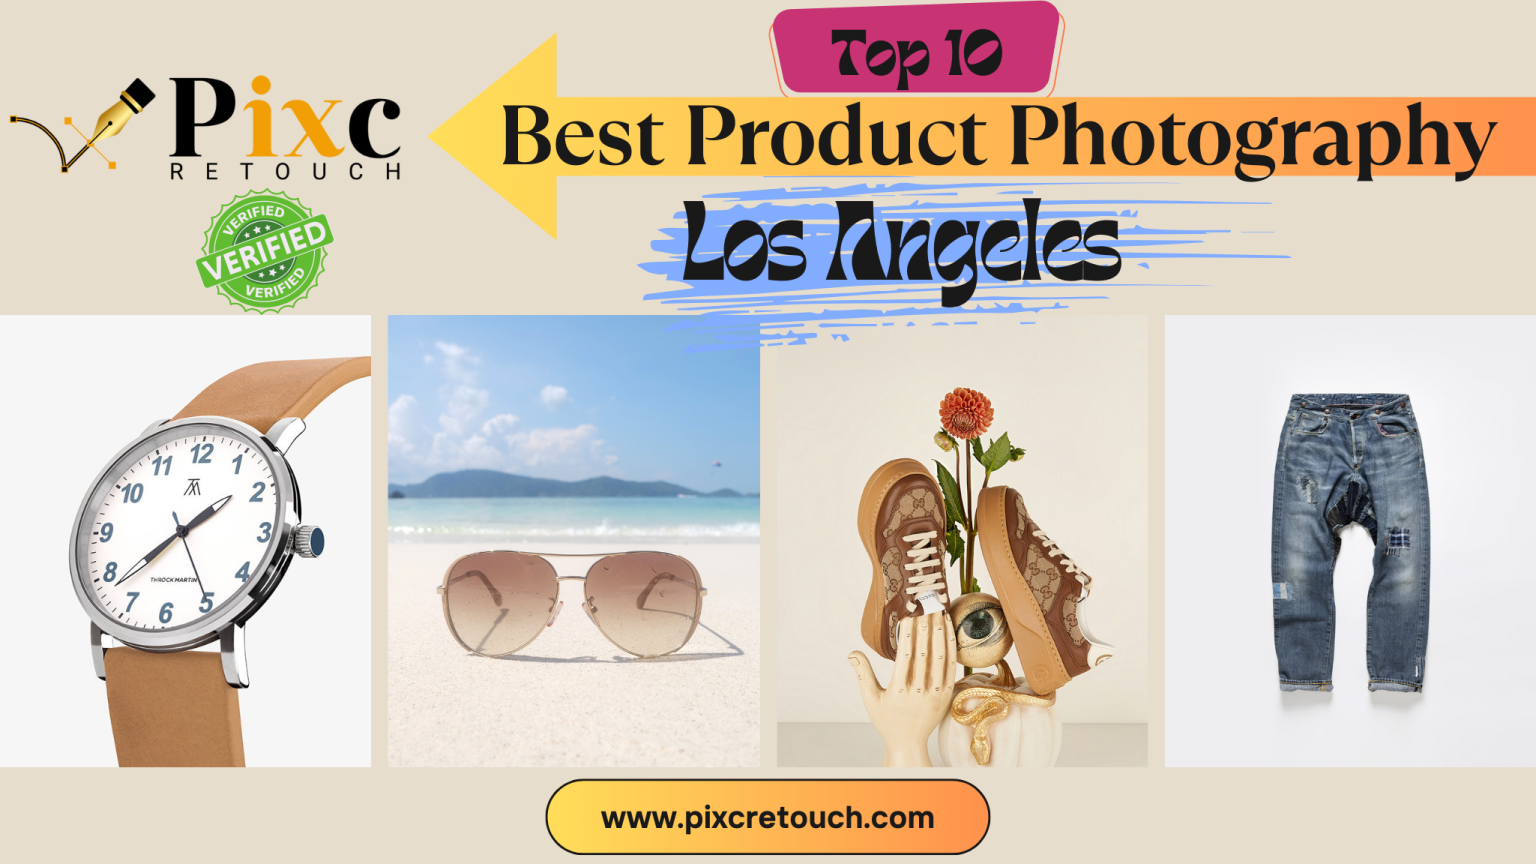 Top 10 Best Product Photography in Los Angeles